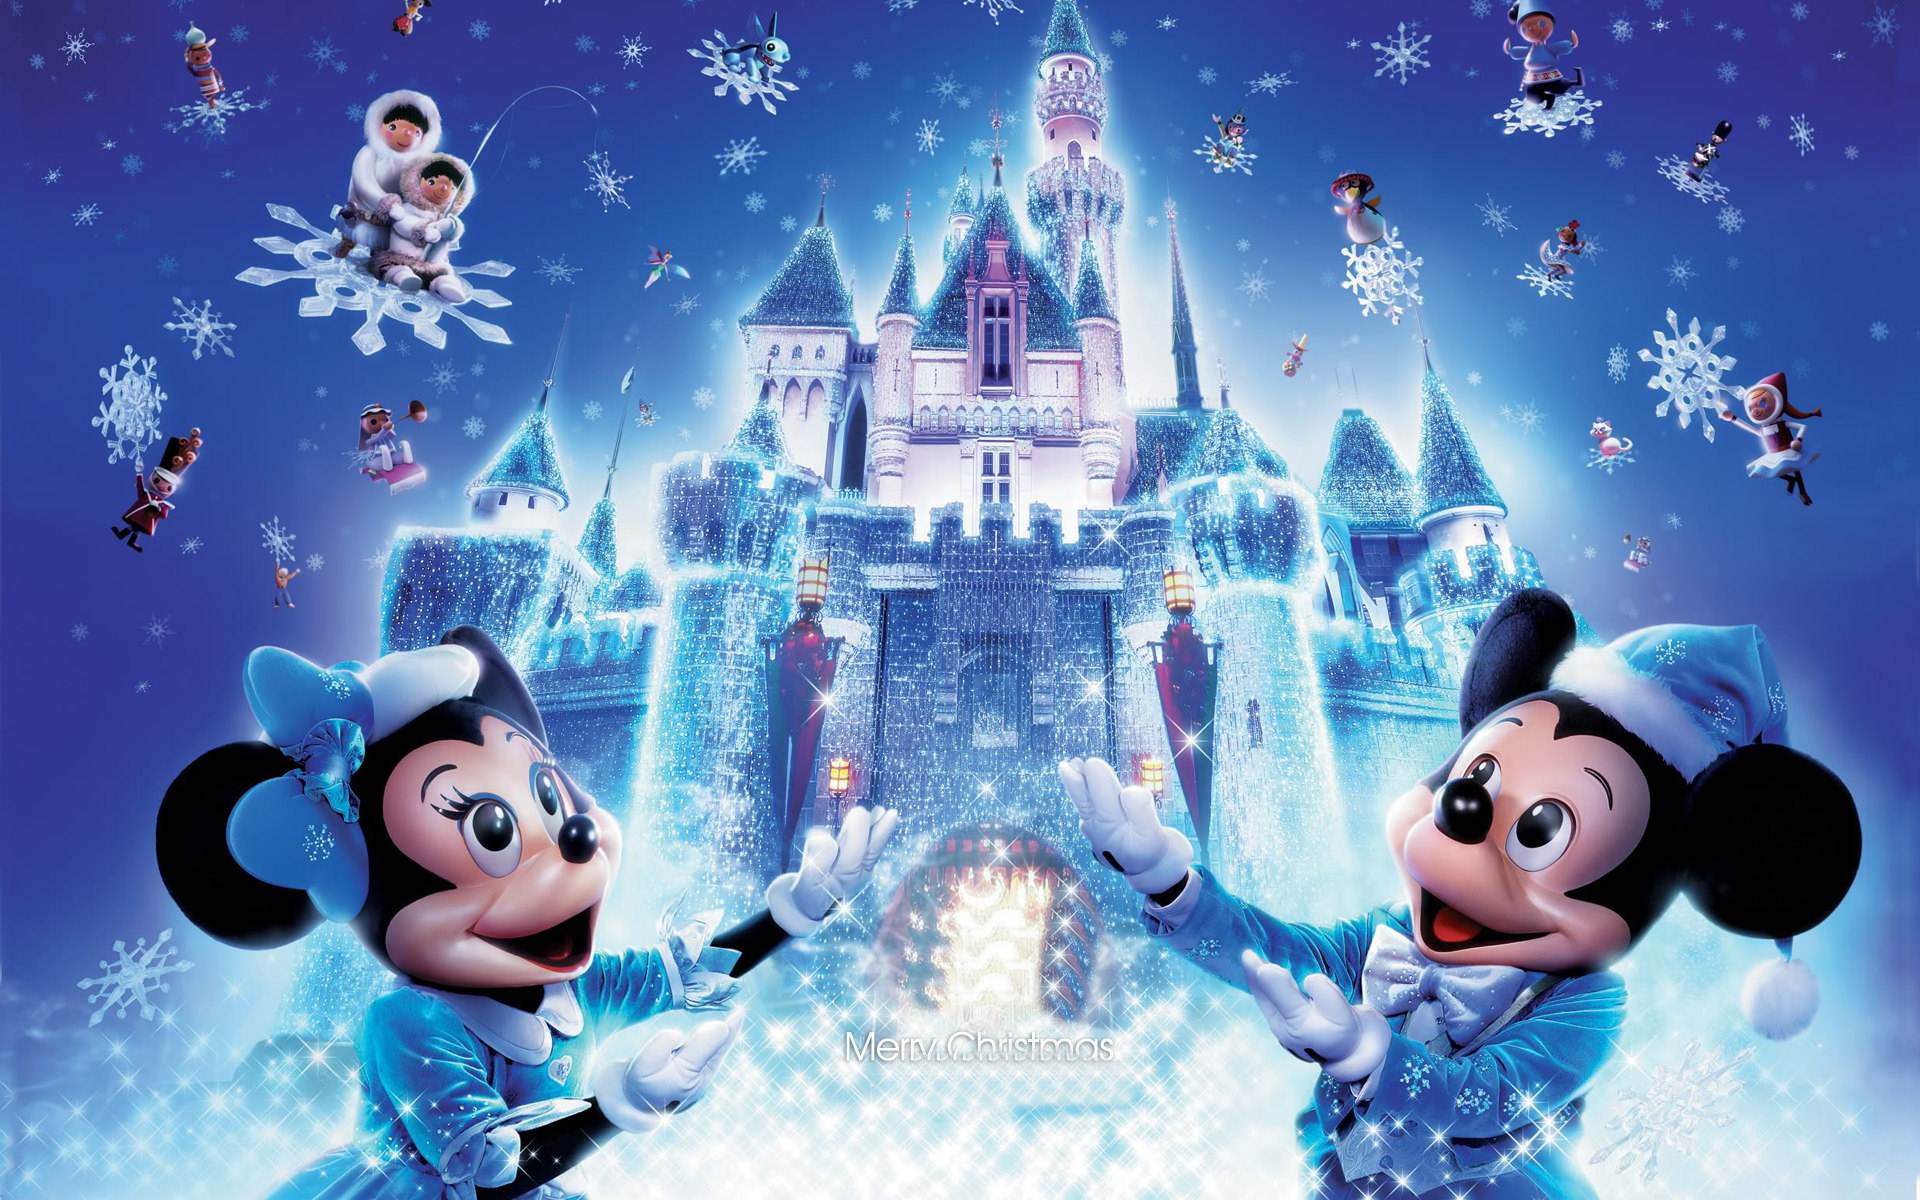 Disney Castle Christmas Image Free Cell Phone Wallpaper HD